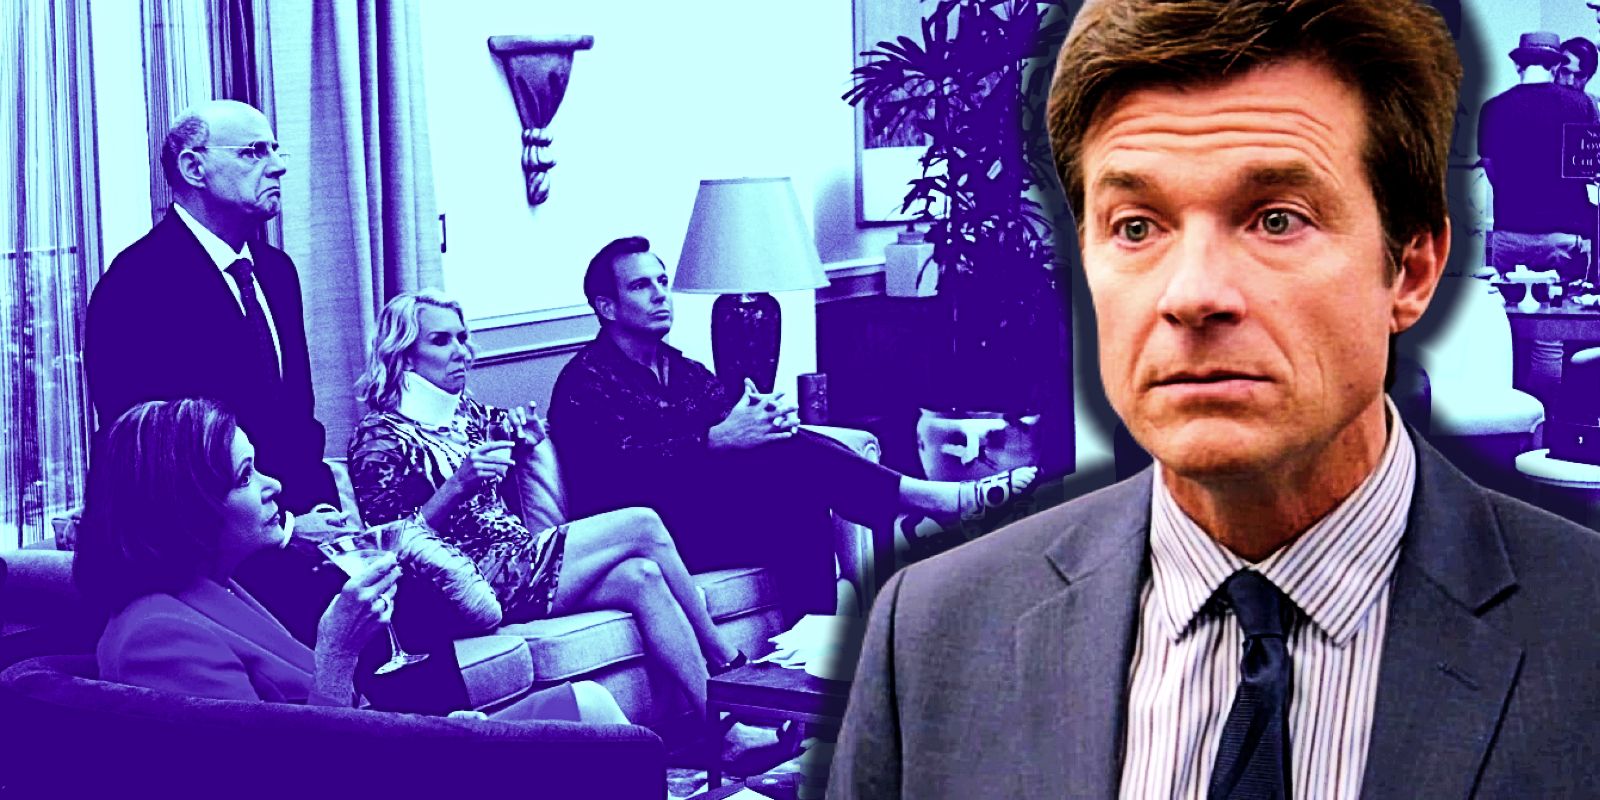 This collage shows Michael looking upset and the older members of the Bluth family setting on couches in Arrested Development.